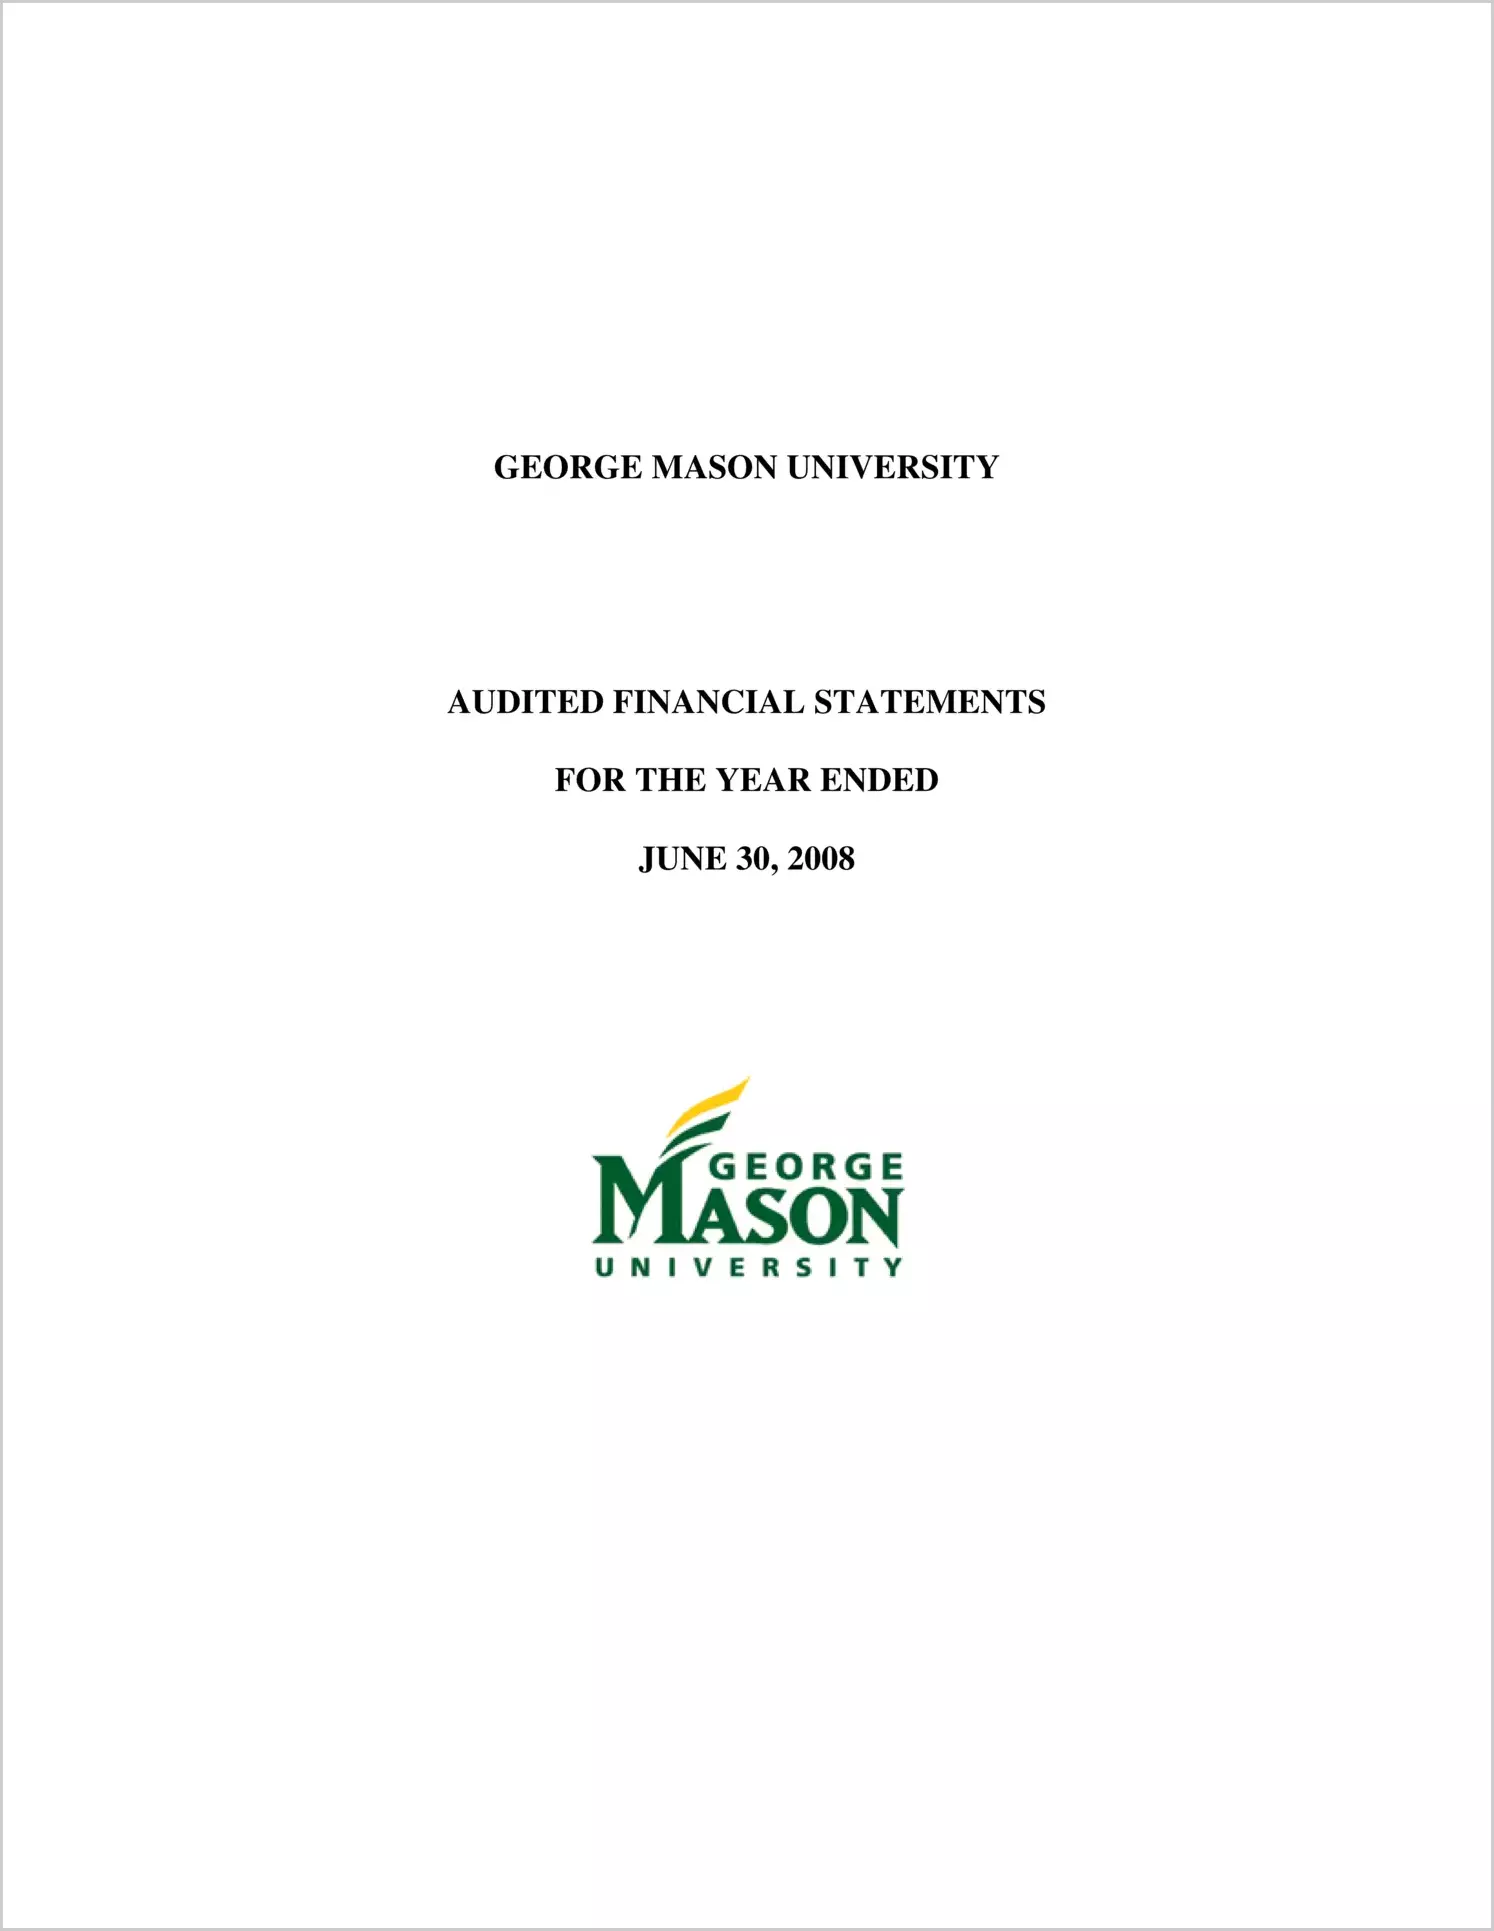 George Mason University Financial Statements  for the year ended June 30, 2008